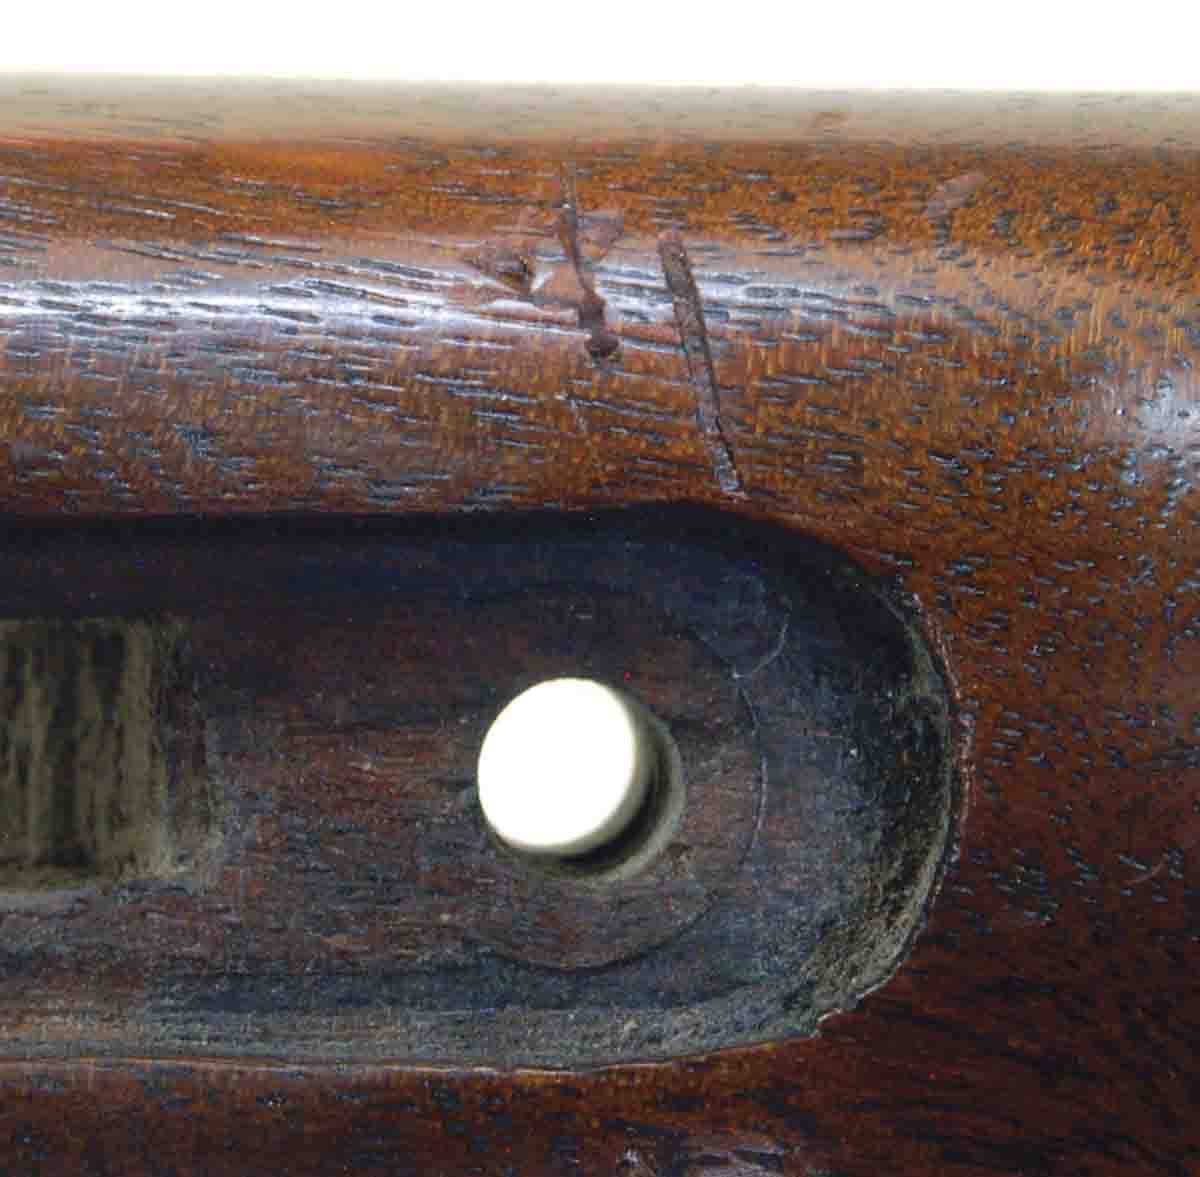 Scratches on this old Springfield stock show signs of a screwdriver slipping out of the screw slot.